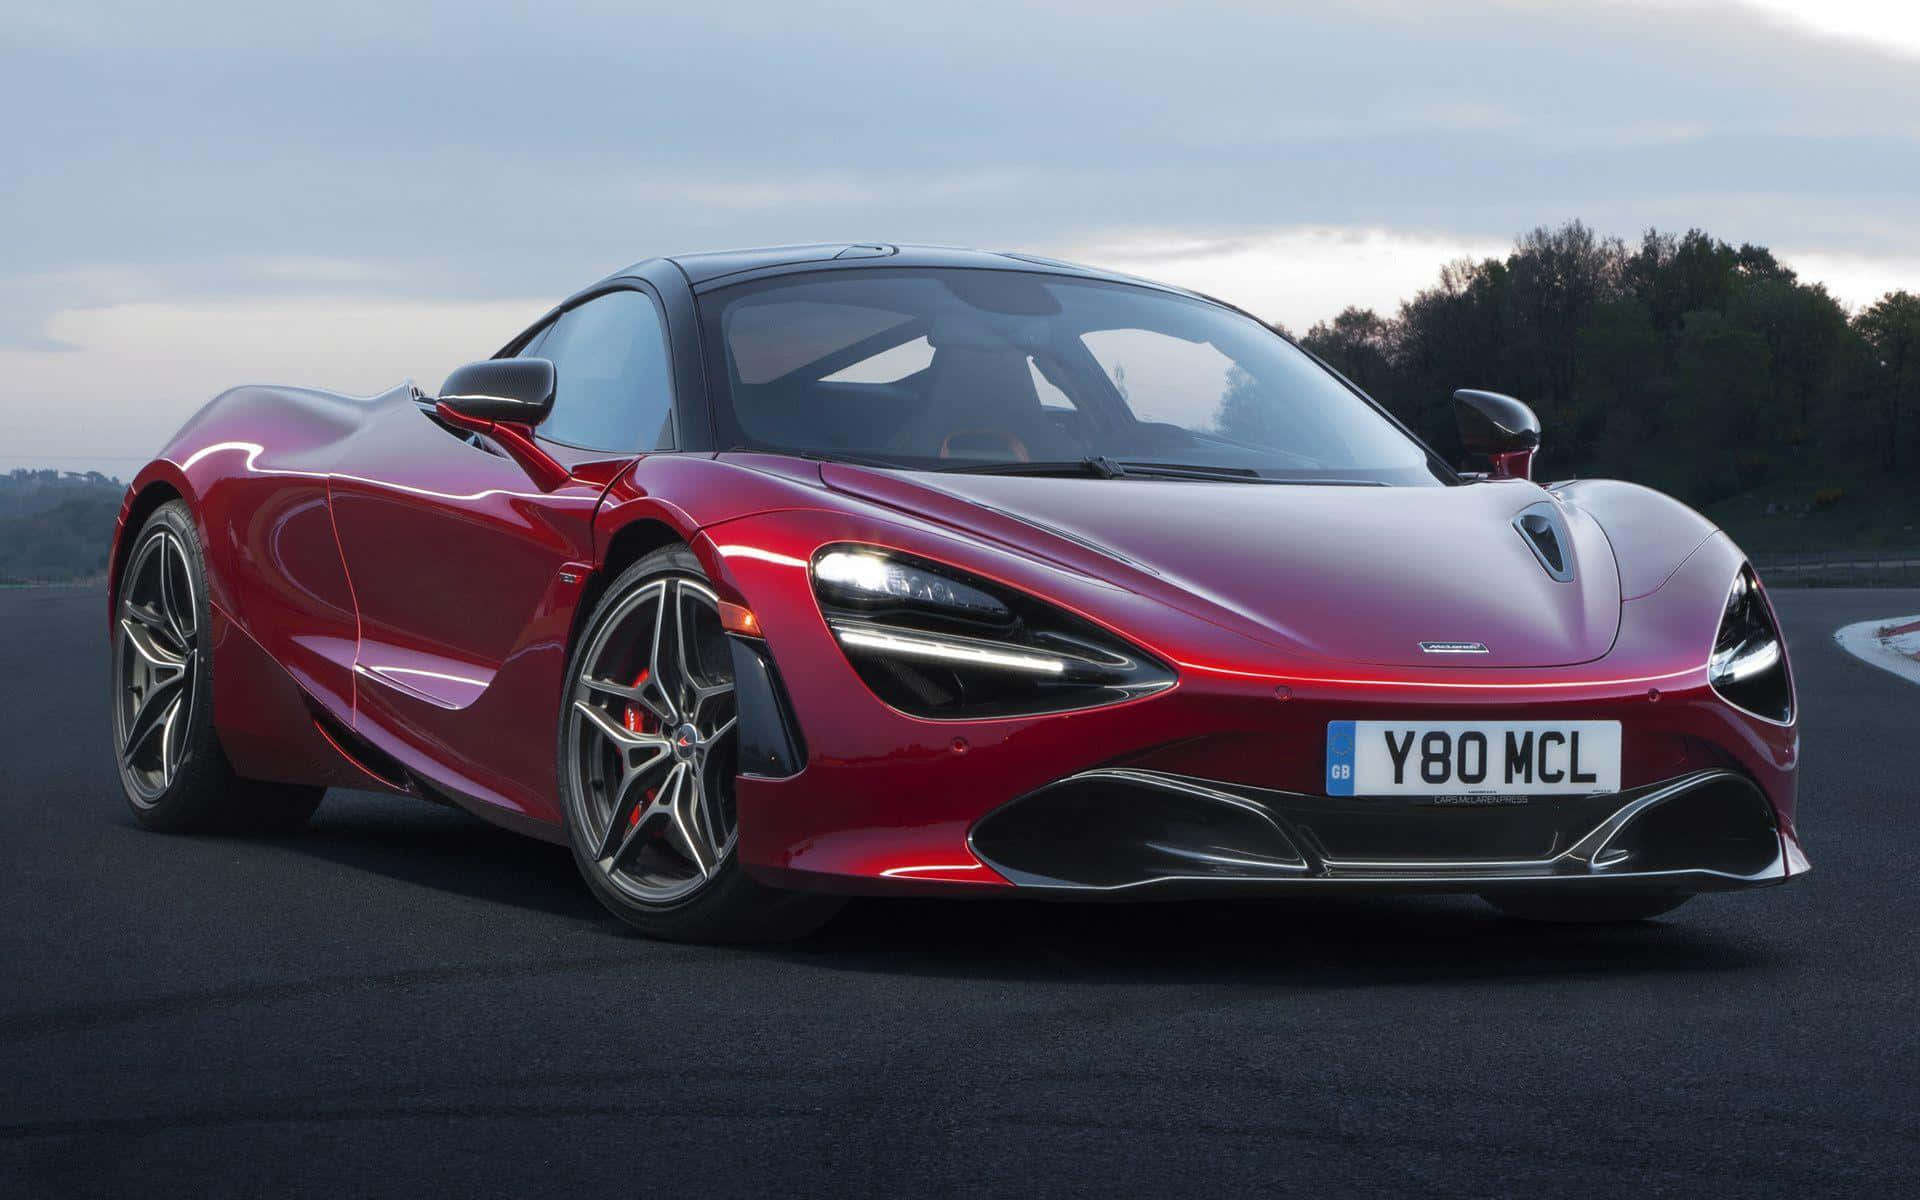 The Ultimate Performance Machine, the Mclaren 720S